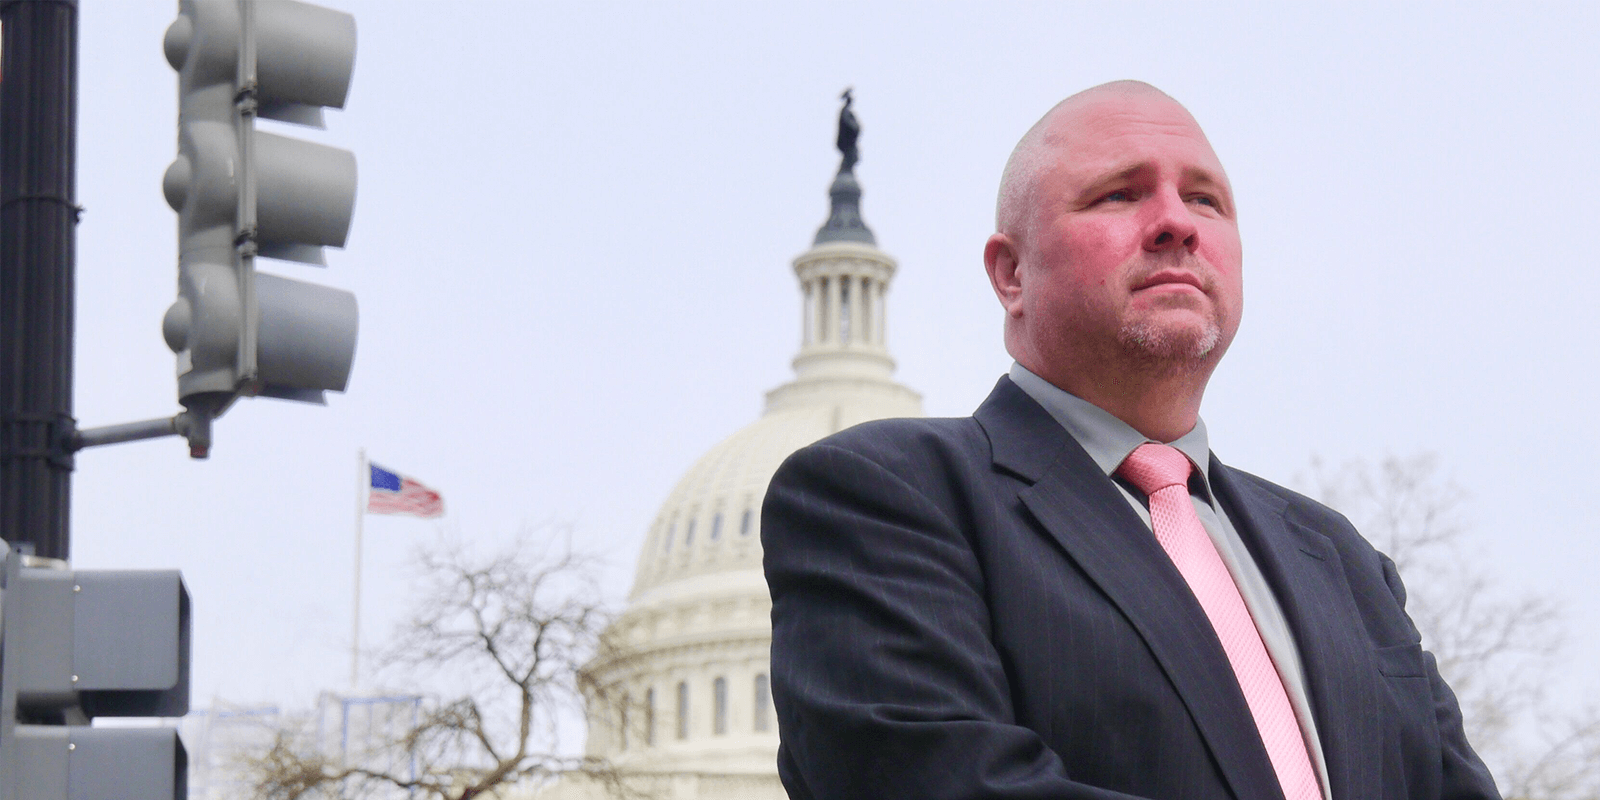 On Capitol Hill, AFSCME Member Urges Congress to Renew Loan Repayment Program